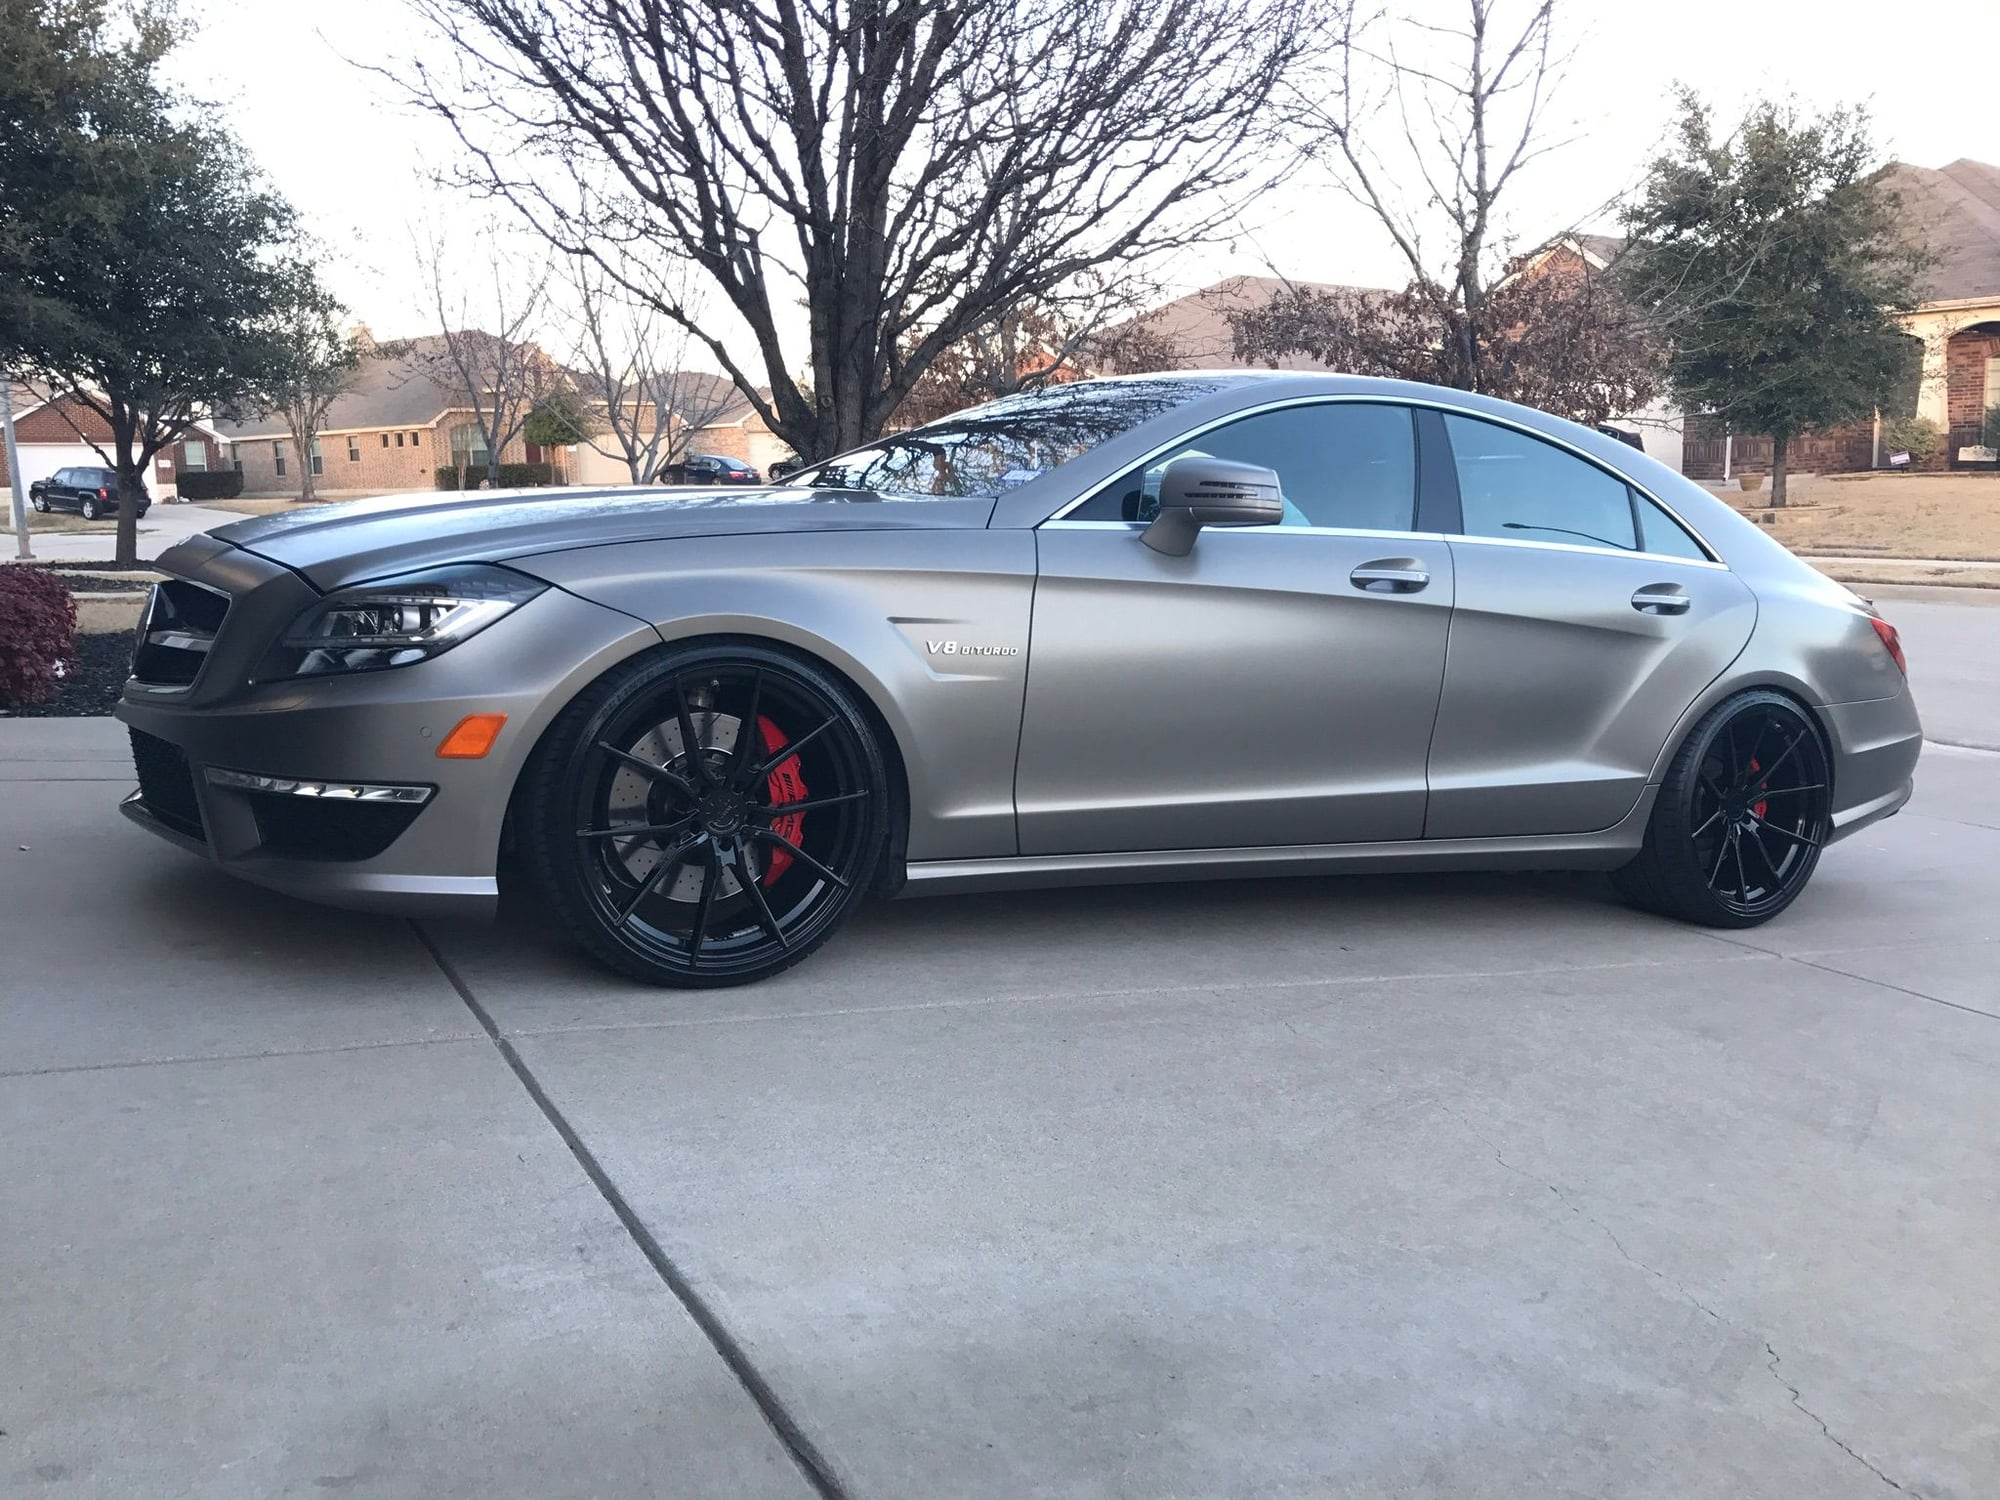 2012 Mercedes-Benz CLS63 AMG - 2012 CLS63 PCE 1 of 30 ever made - Used - VIN WDDLJ7EB0CA031511 - 8 cyl - 2WD - Automatic - Sedan - Other - Keller, TX 76244, United States